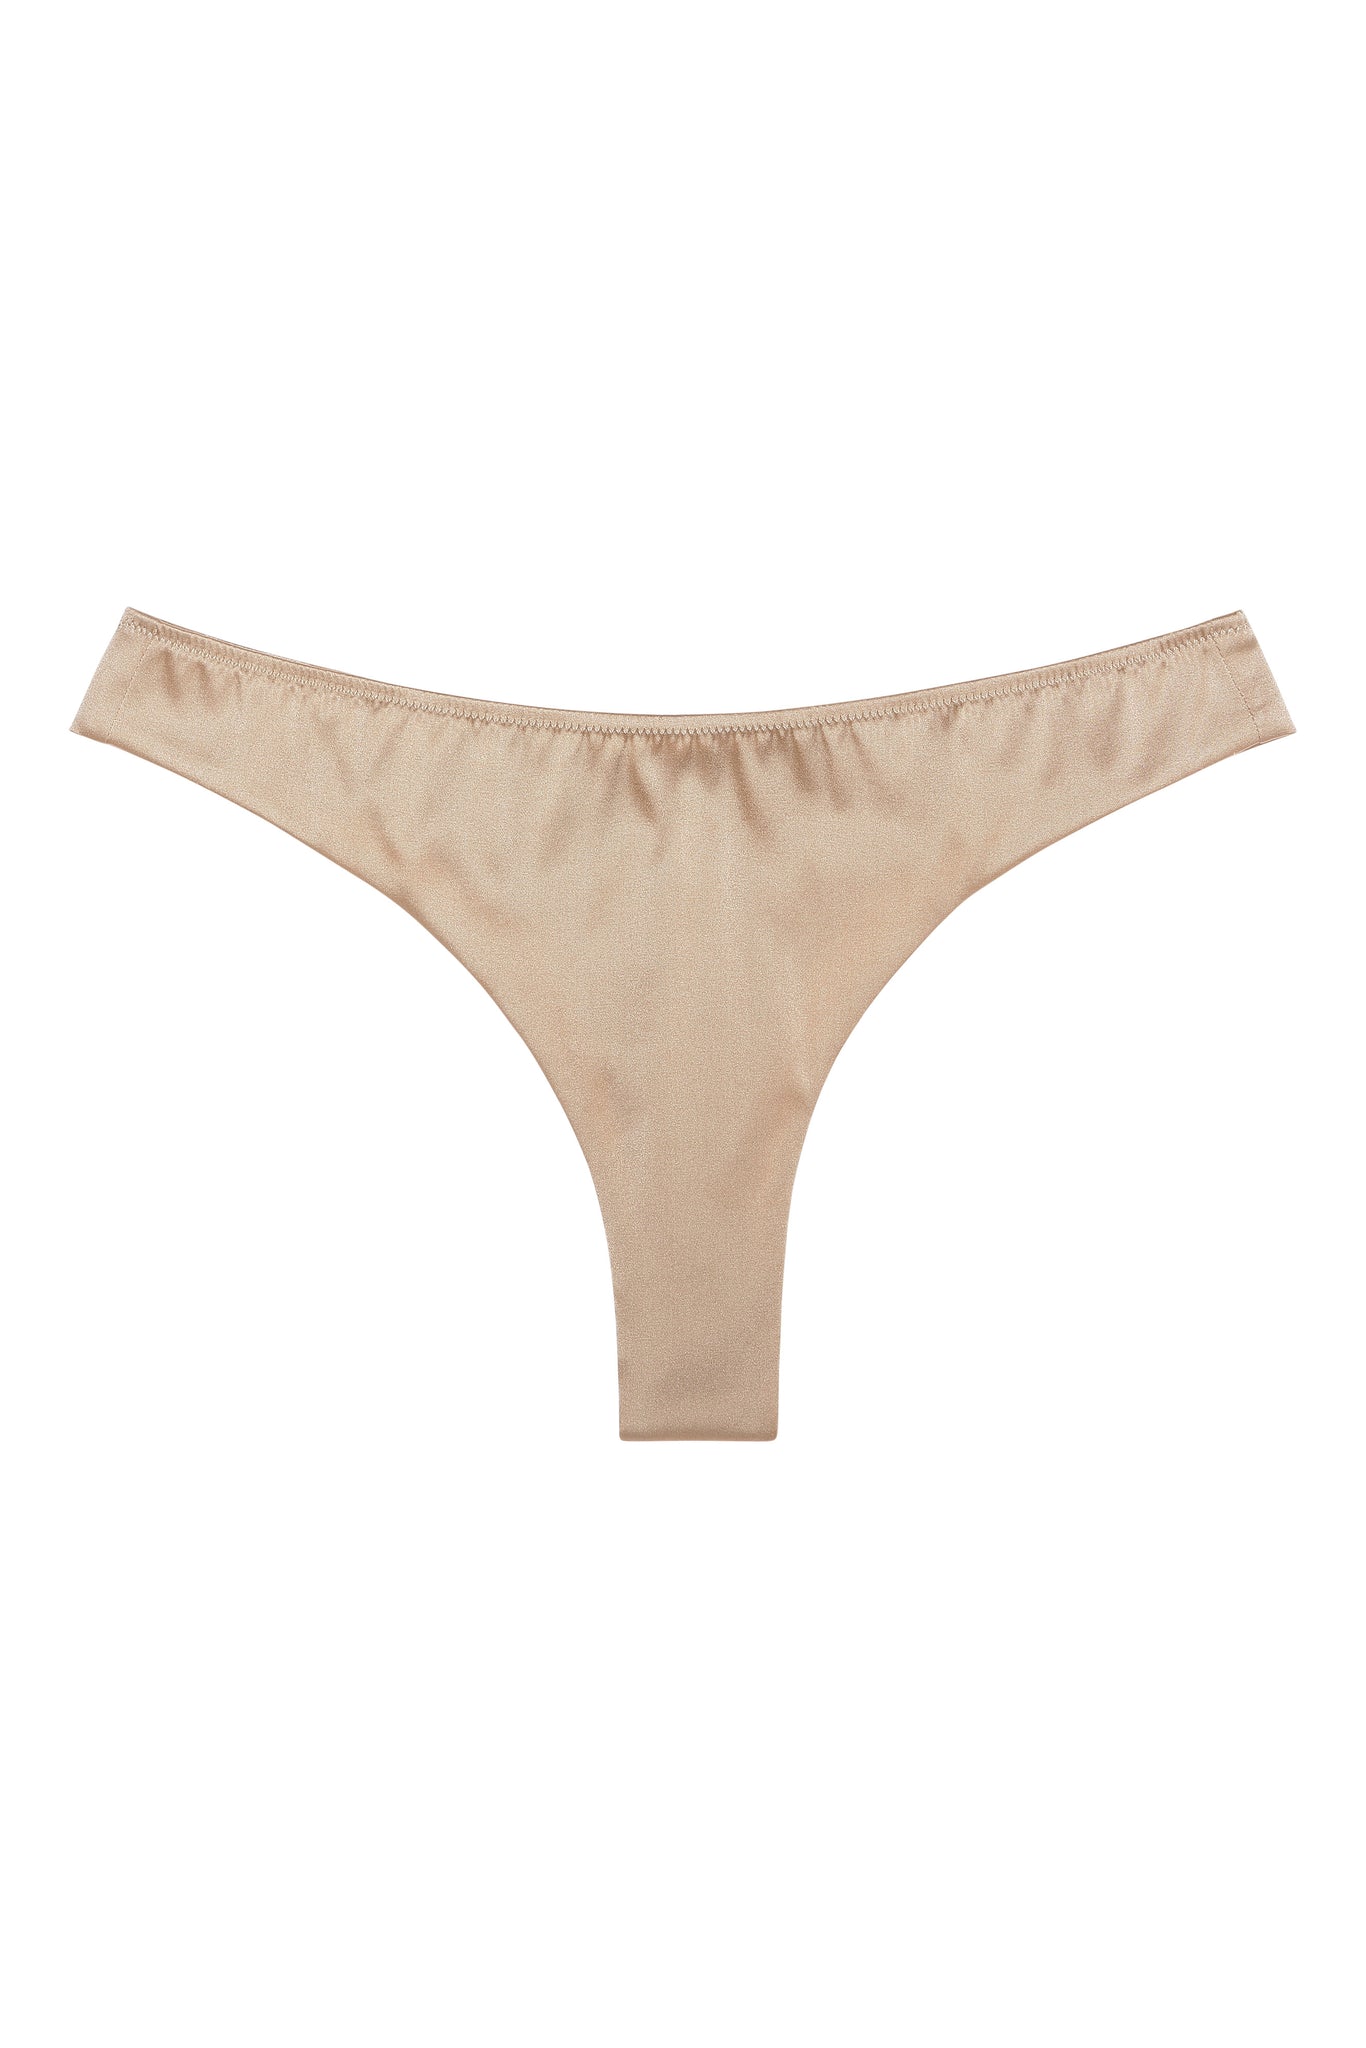 perfect nude effect underneath clothing ** Everyday Silk thong